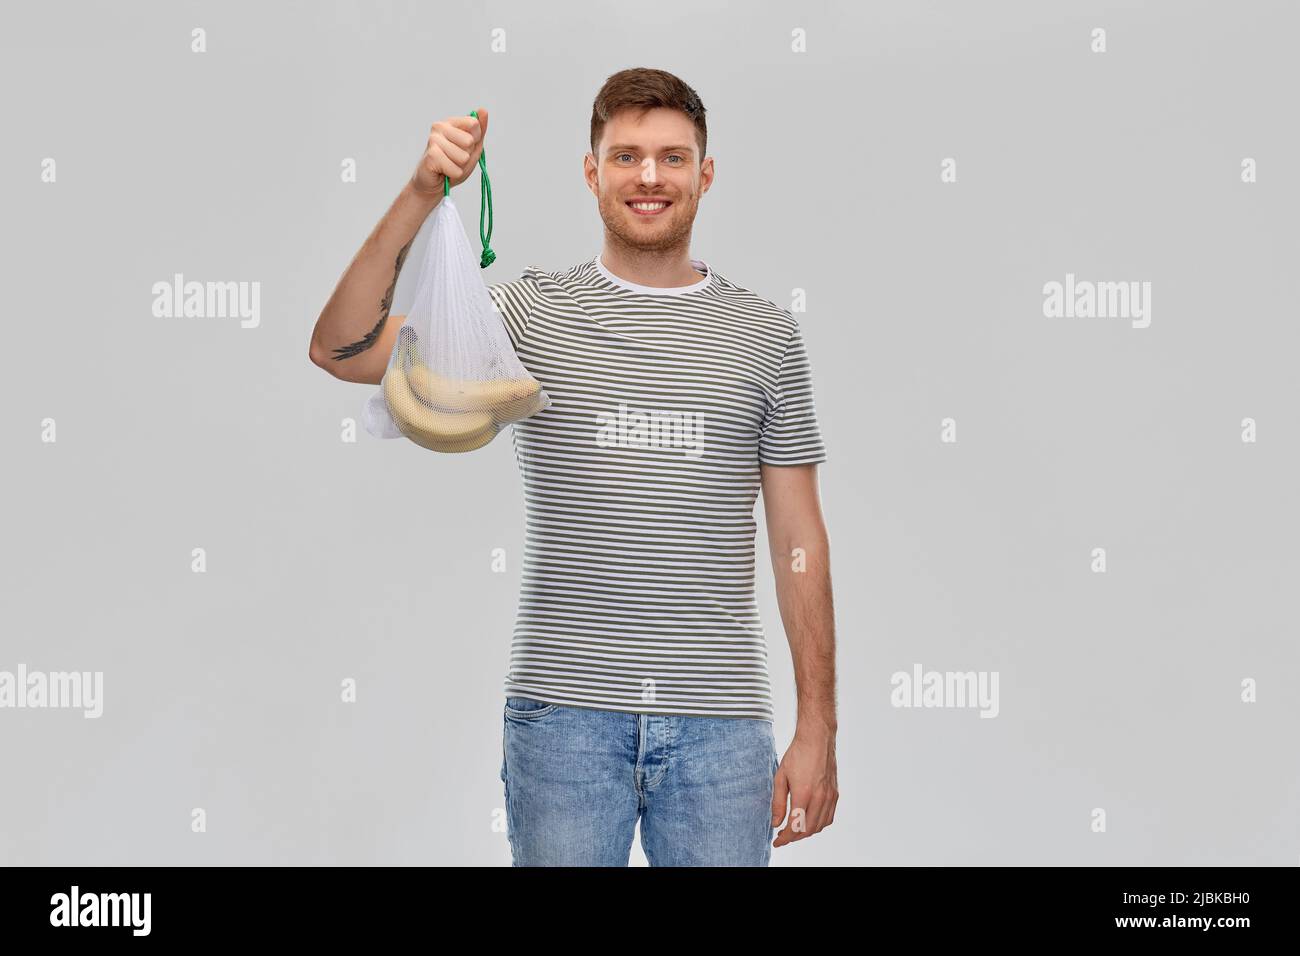 happy man holding reusable string bag with bananas Stock Photo